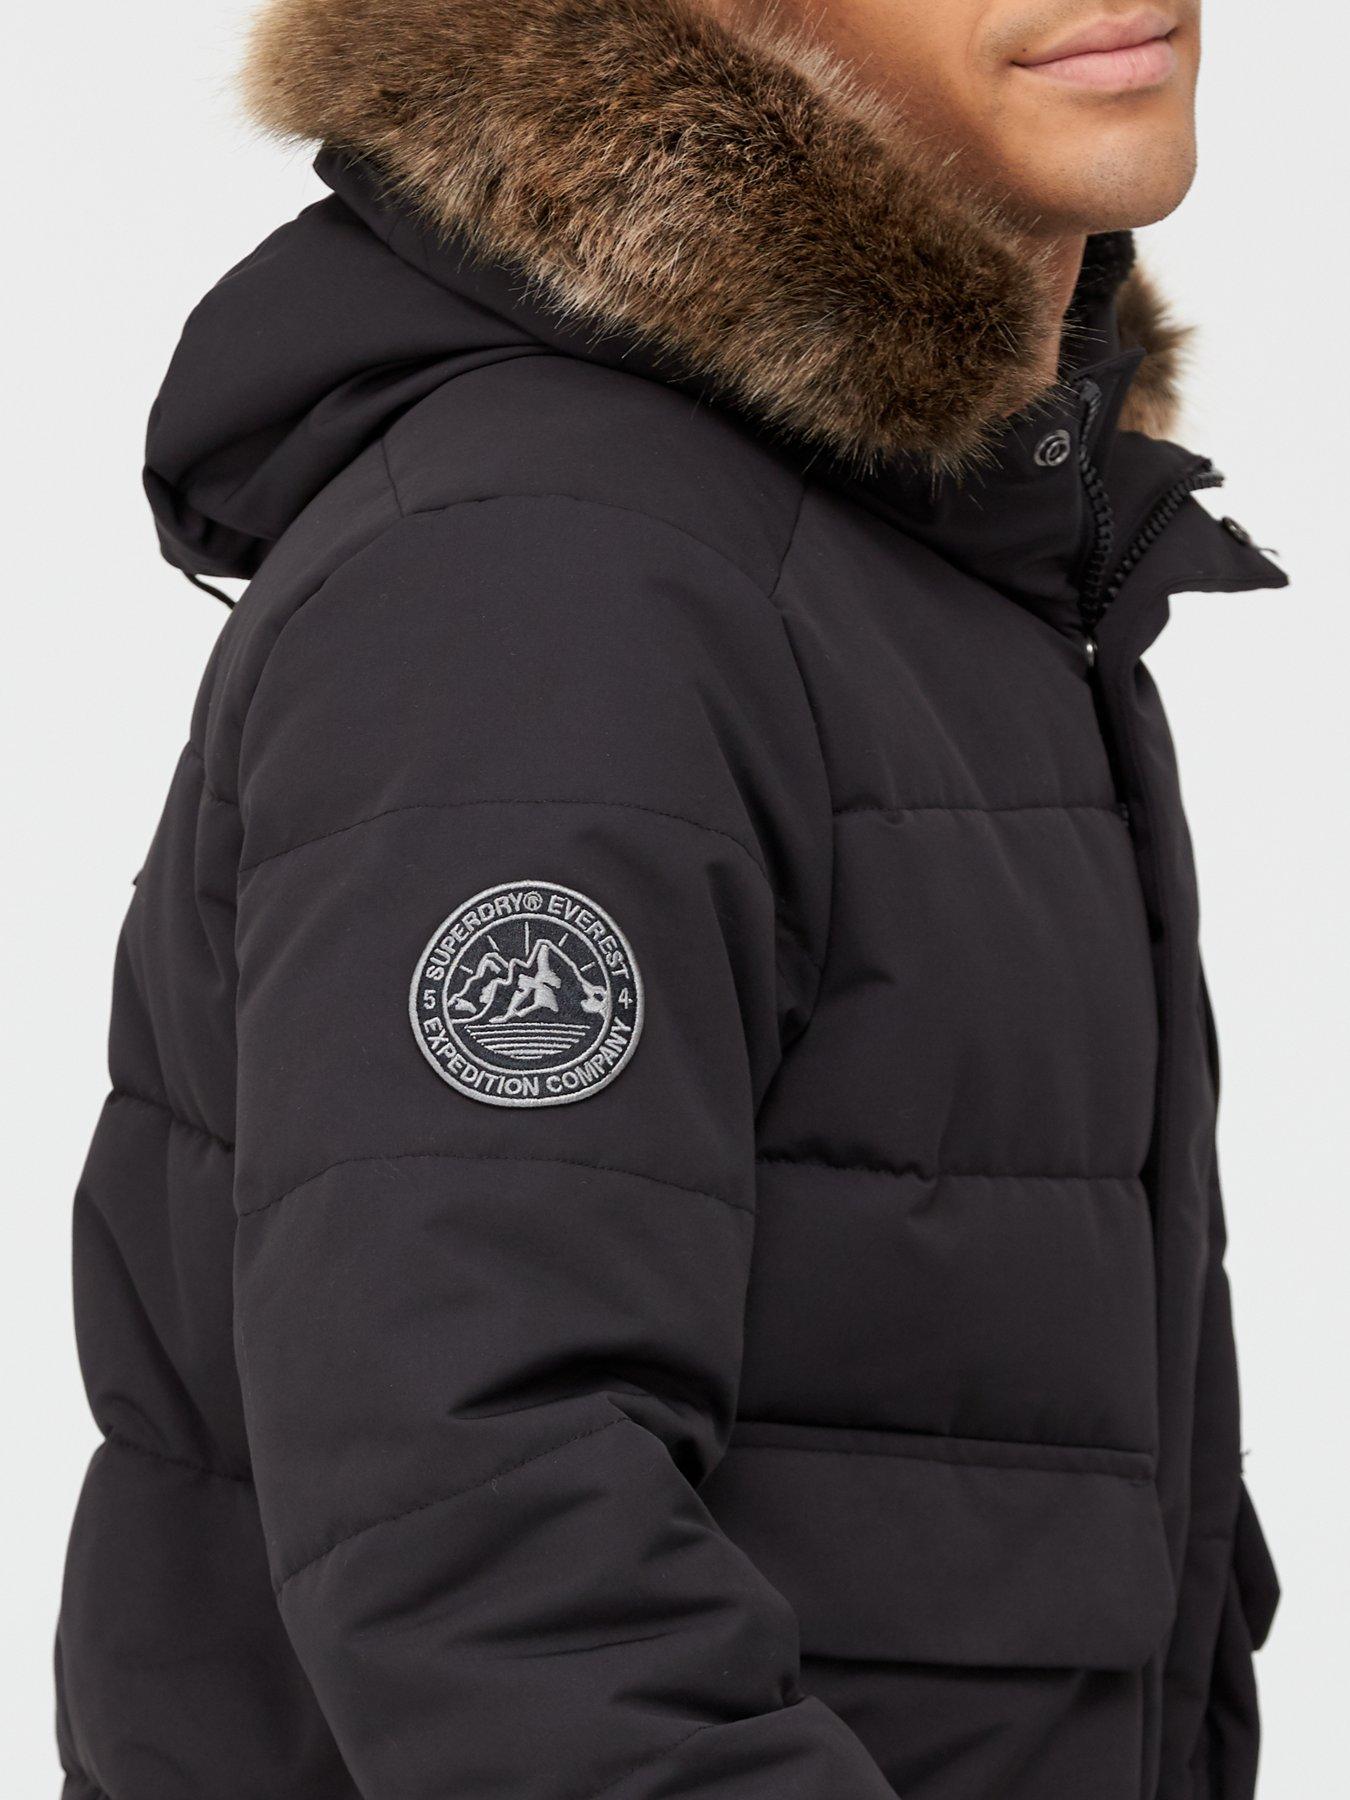 superdry everest wax jacket review